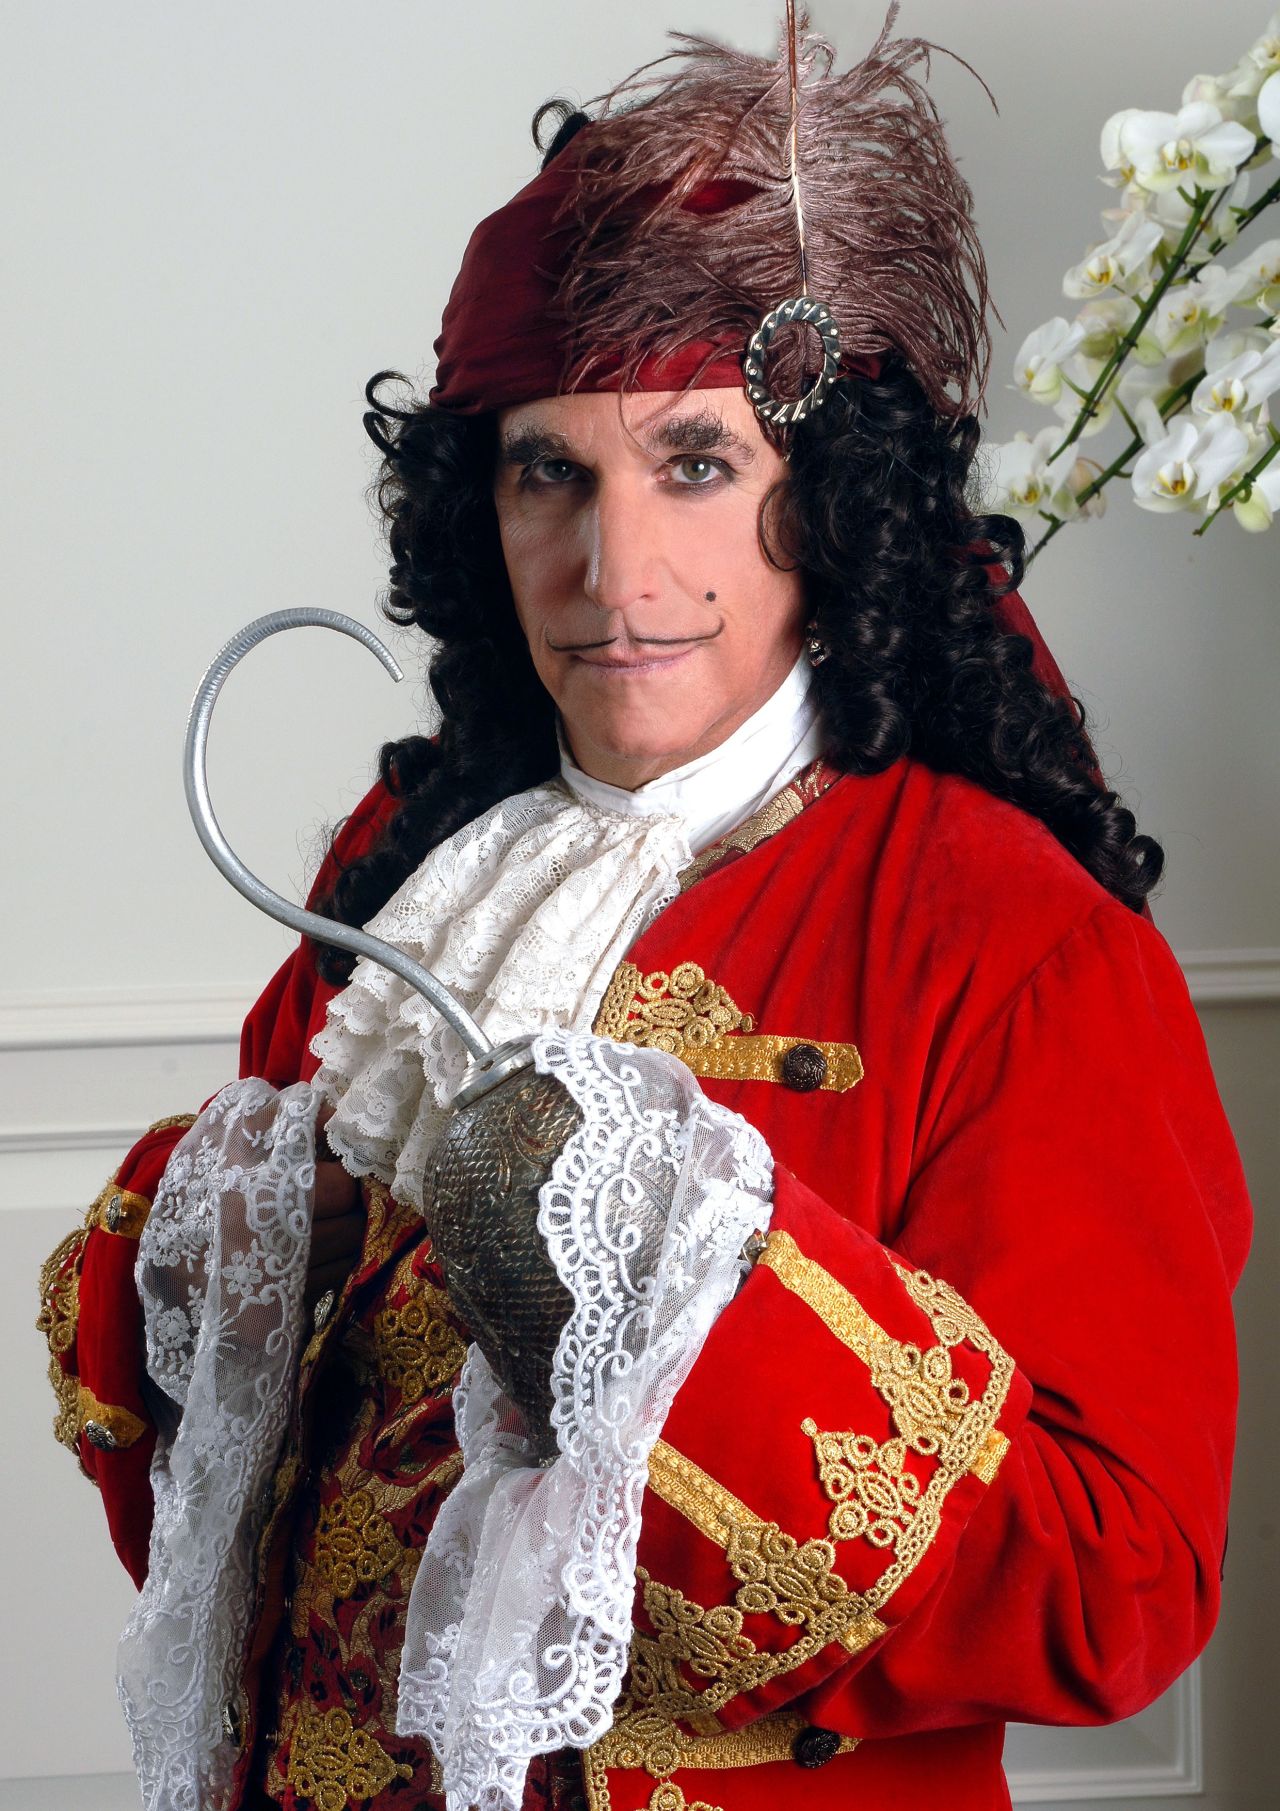 Pantomime is a British Christmas tradition that sees classic fairy tales brought to life onstage. In recent years, international TV and movie stars have been gracing the panto stage. Pictured, Henry Winkler makes his debut as Hook at New Wimbledon Theatre (2006).